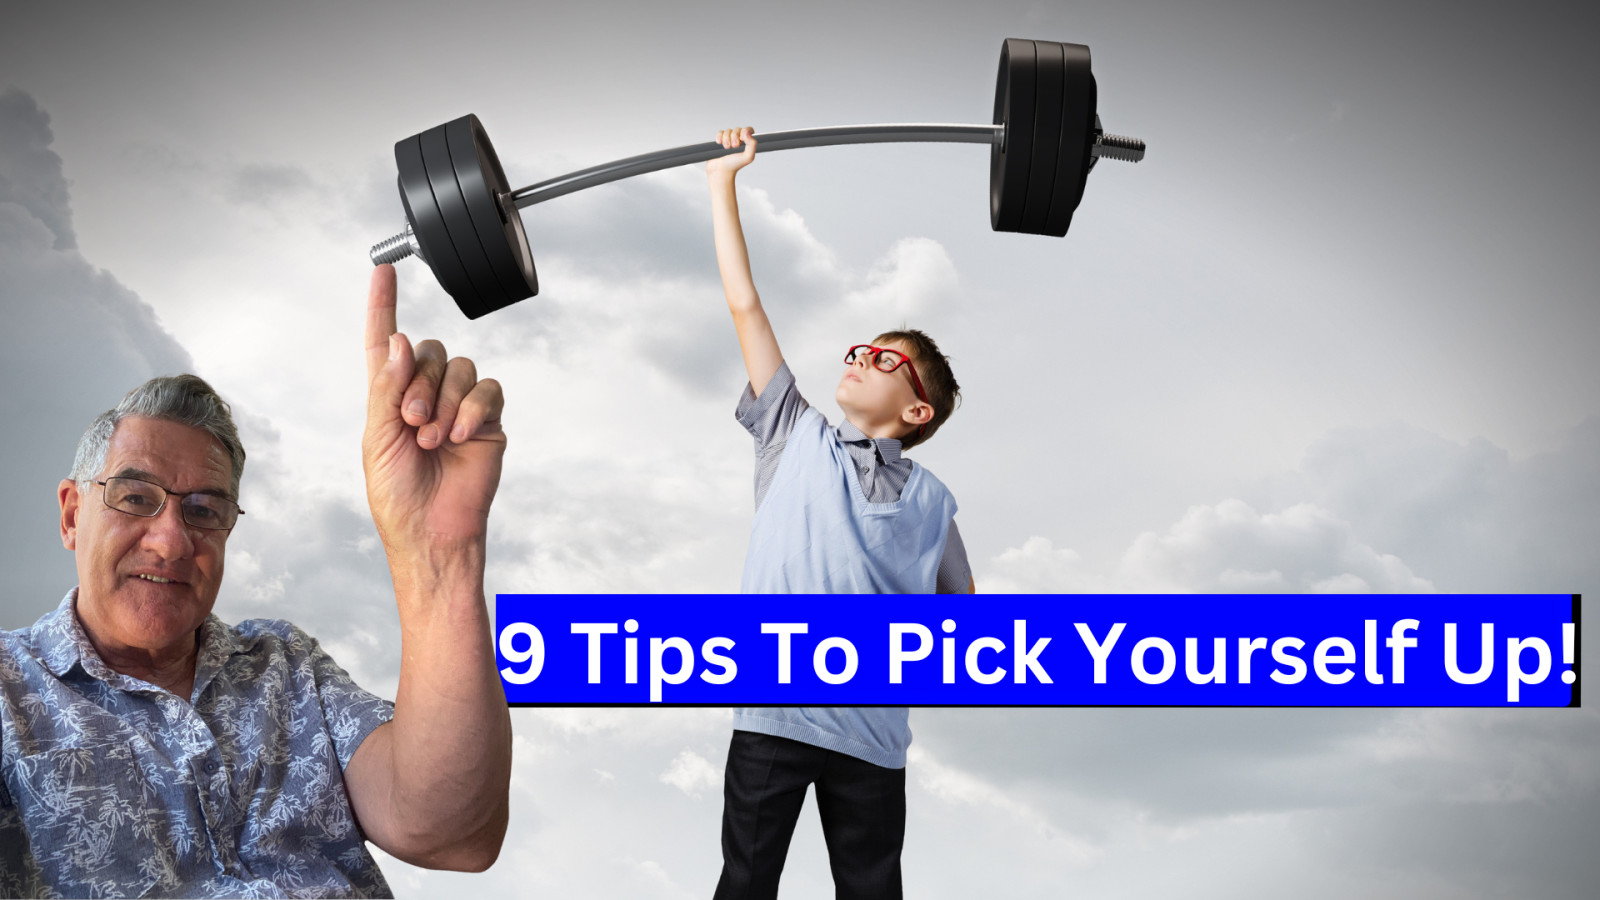 In a slump? 9 Tips To Pick Yourself Up!